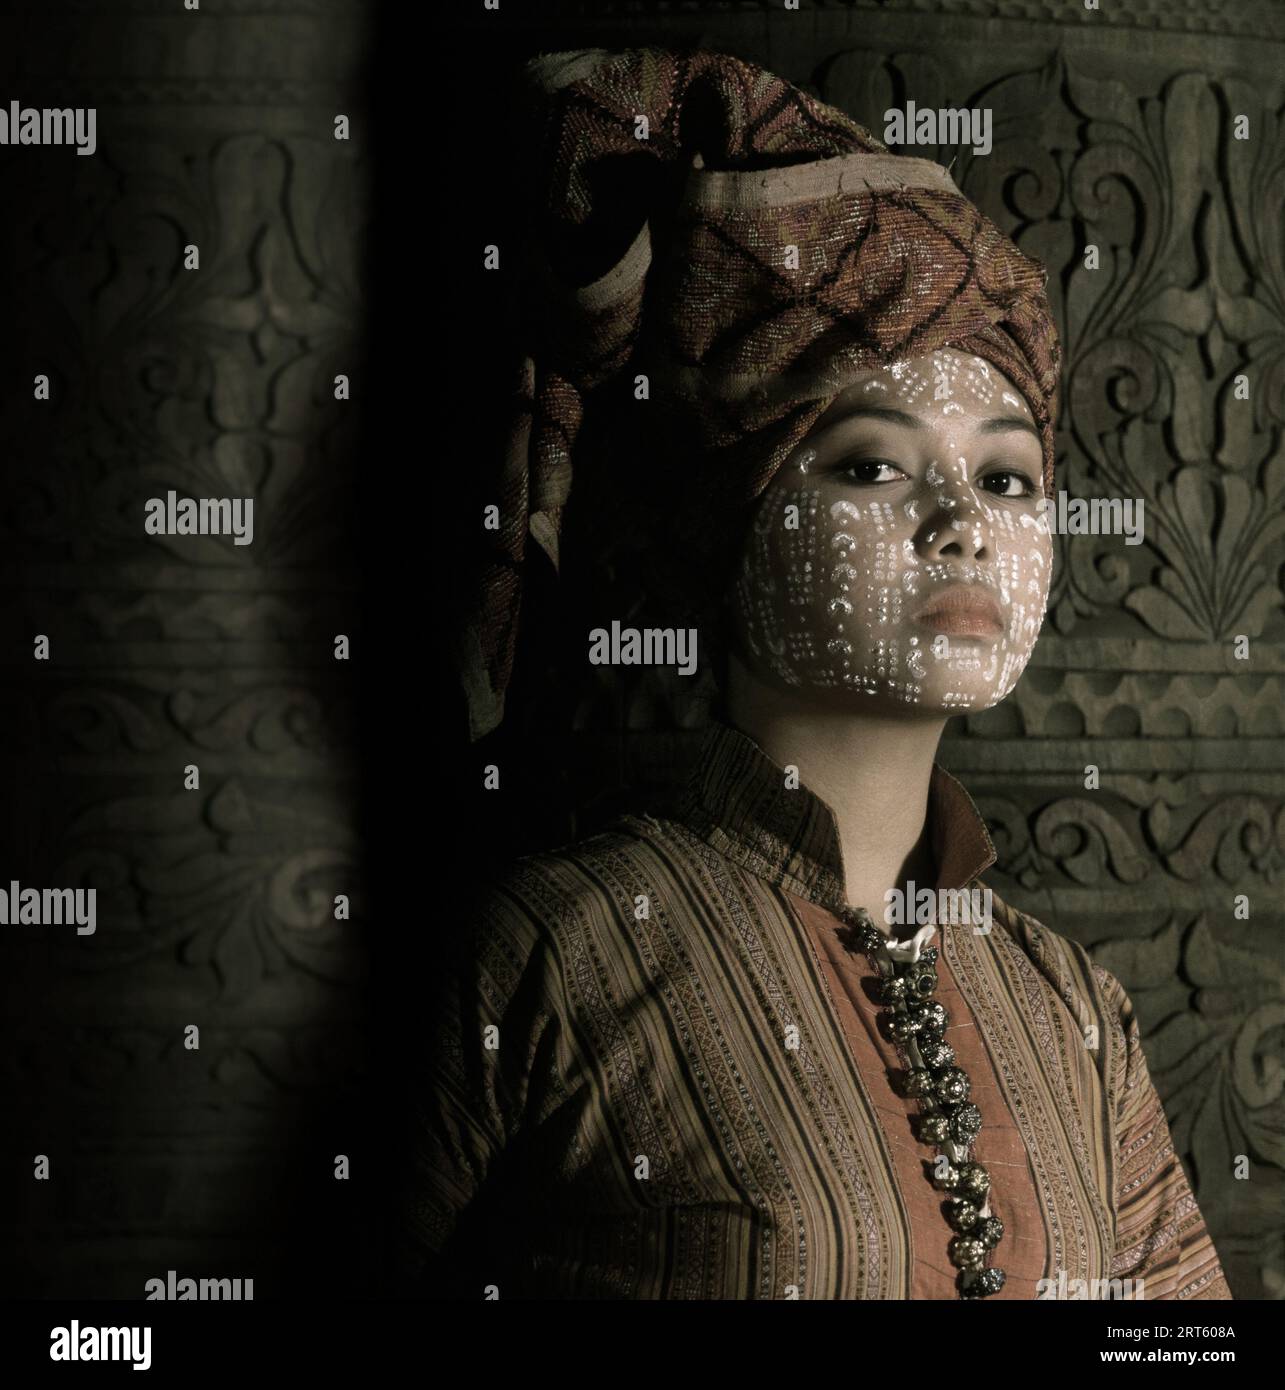 Yakan bride with traditional skin decoration, Philippines. Stock Photo